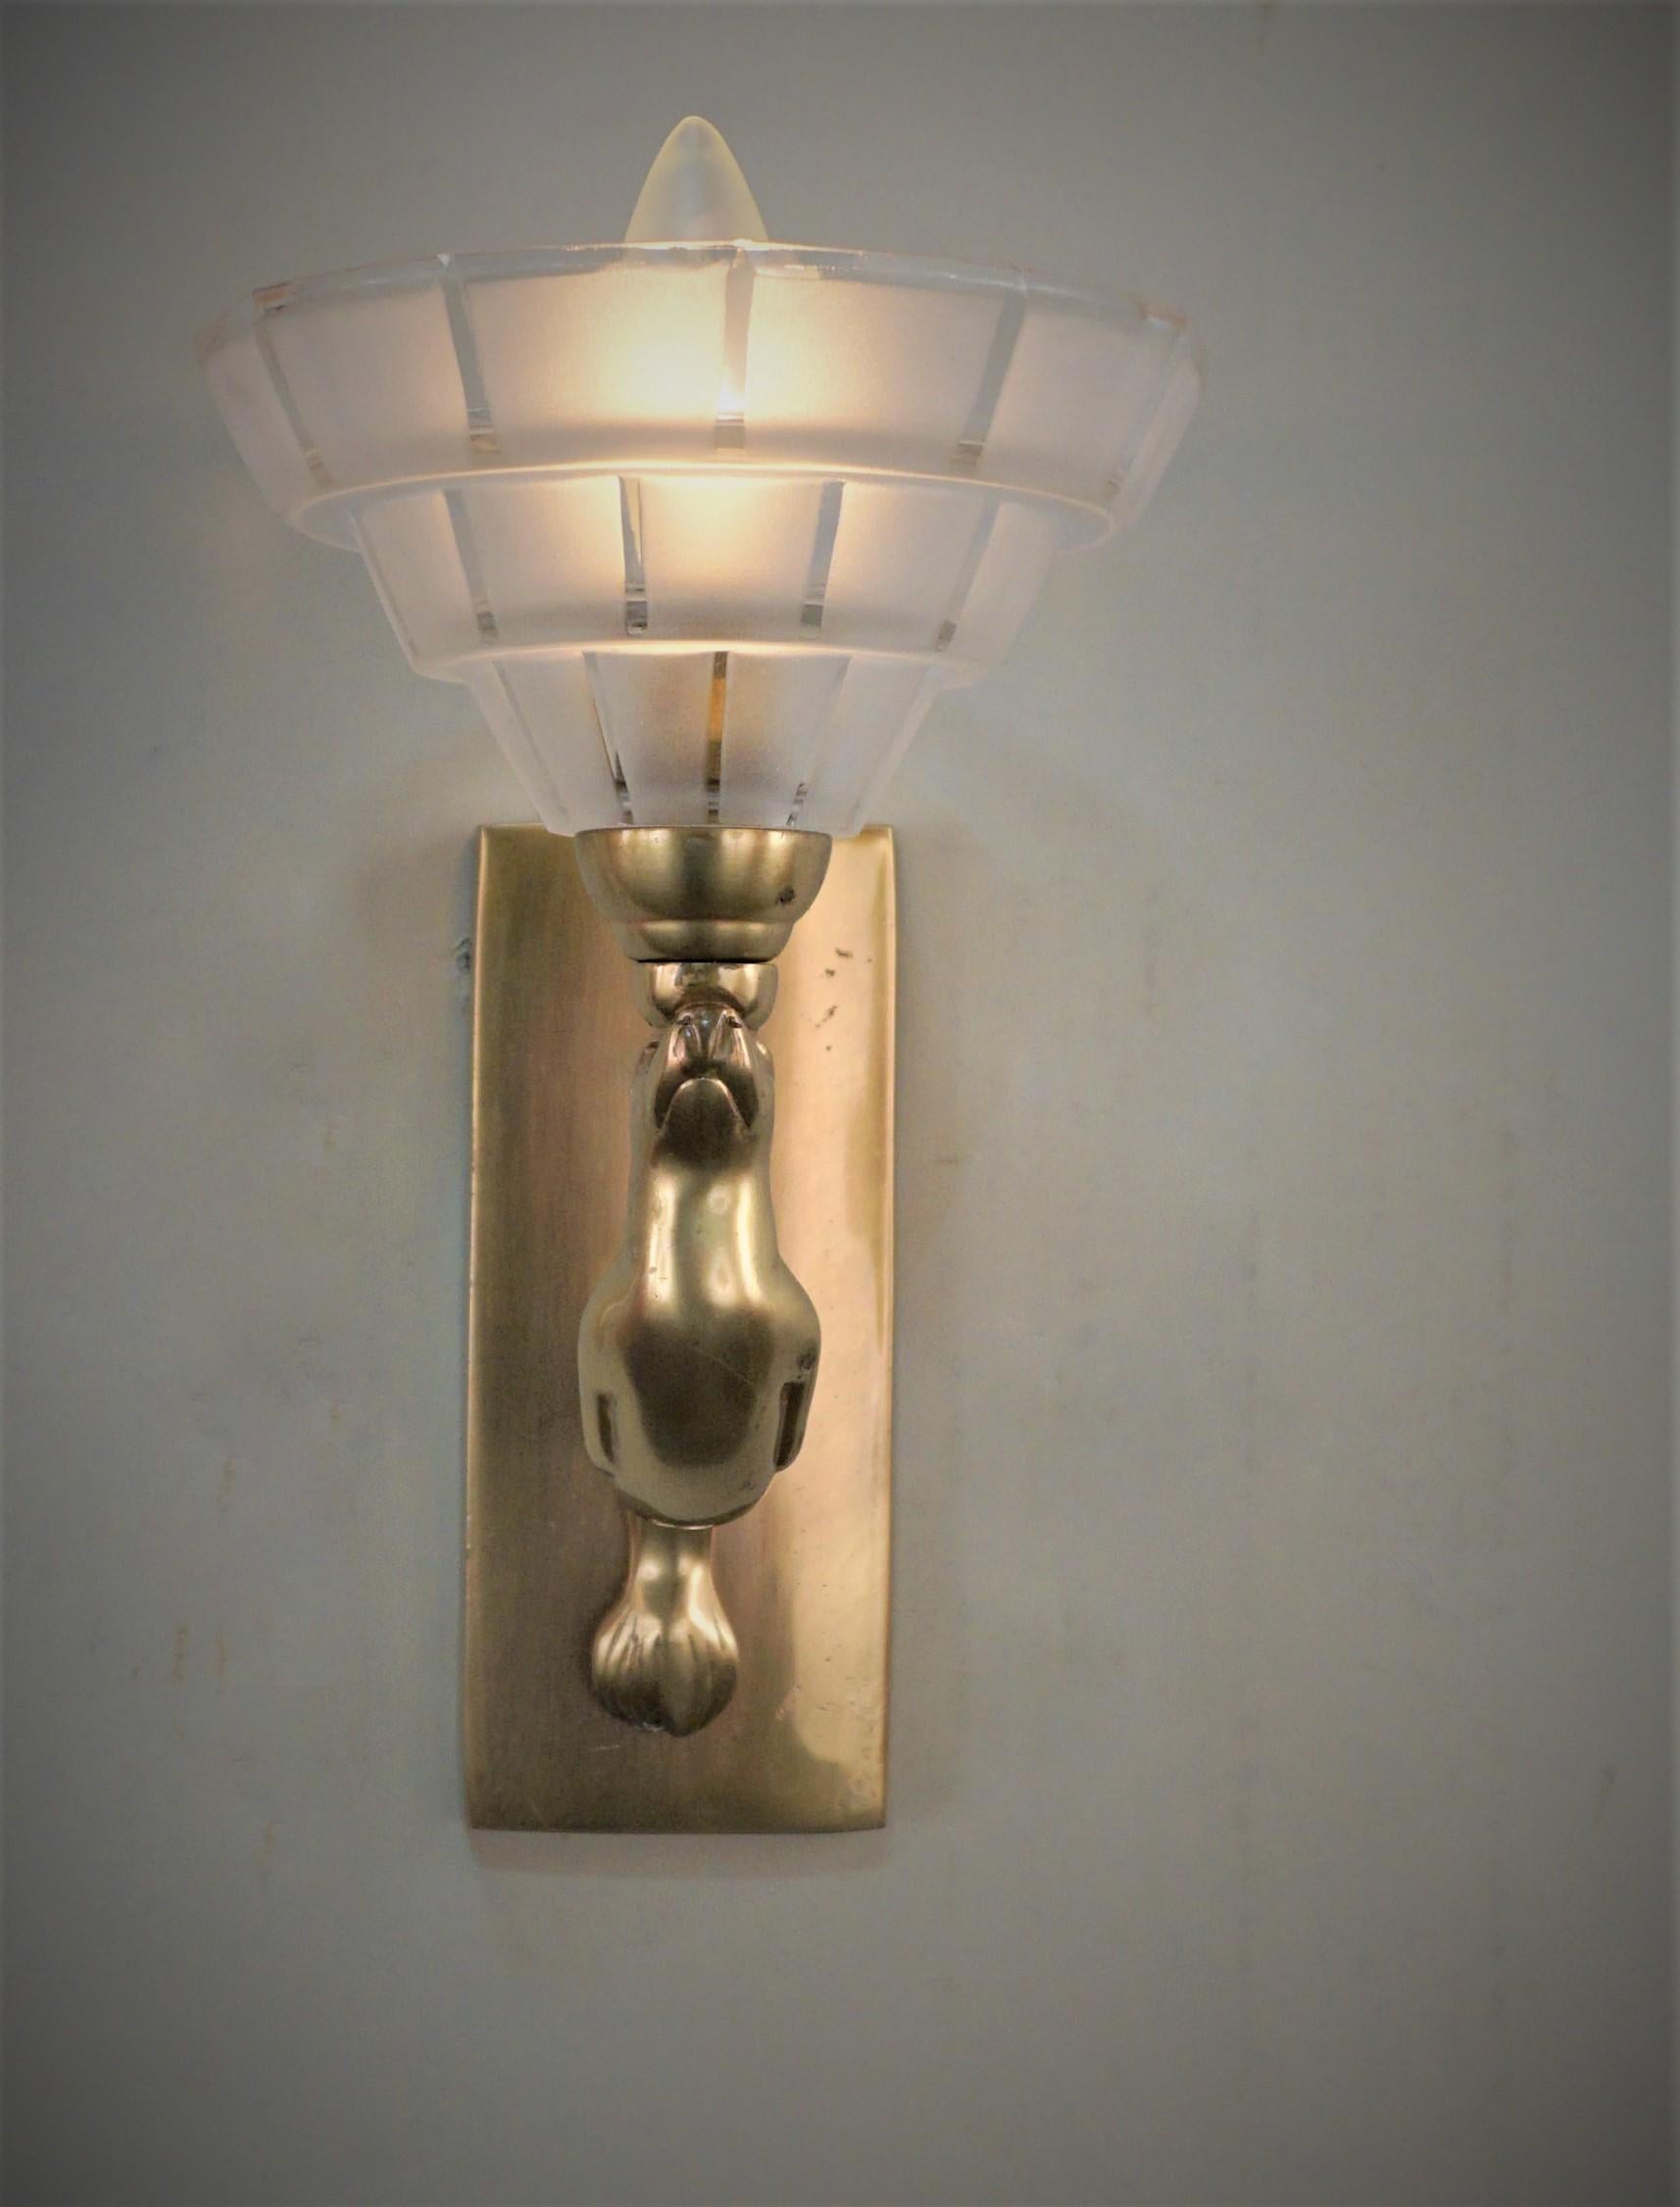 French Art Deco Seal Wall Sconces - 2 pairs For Sale 1